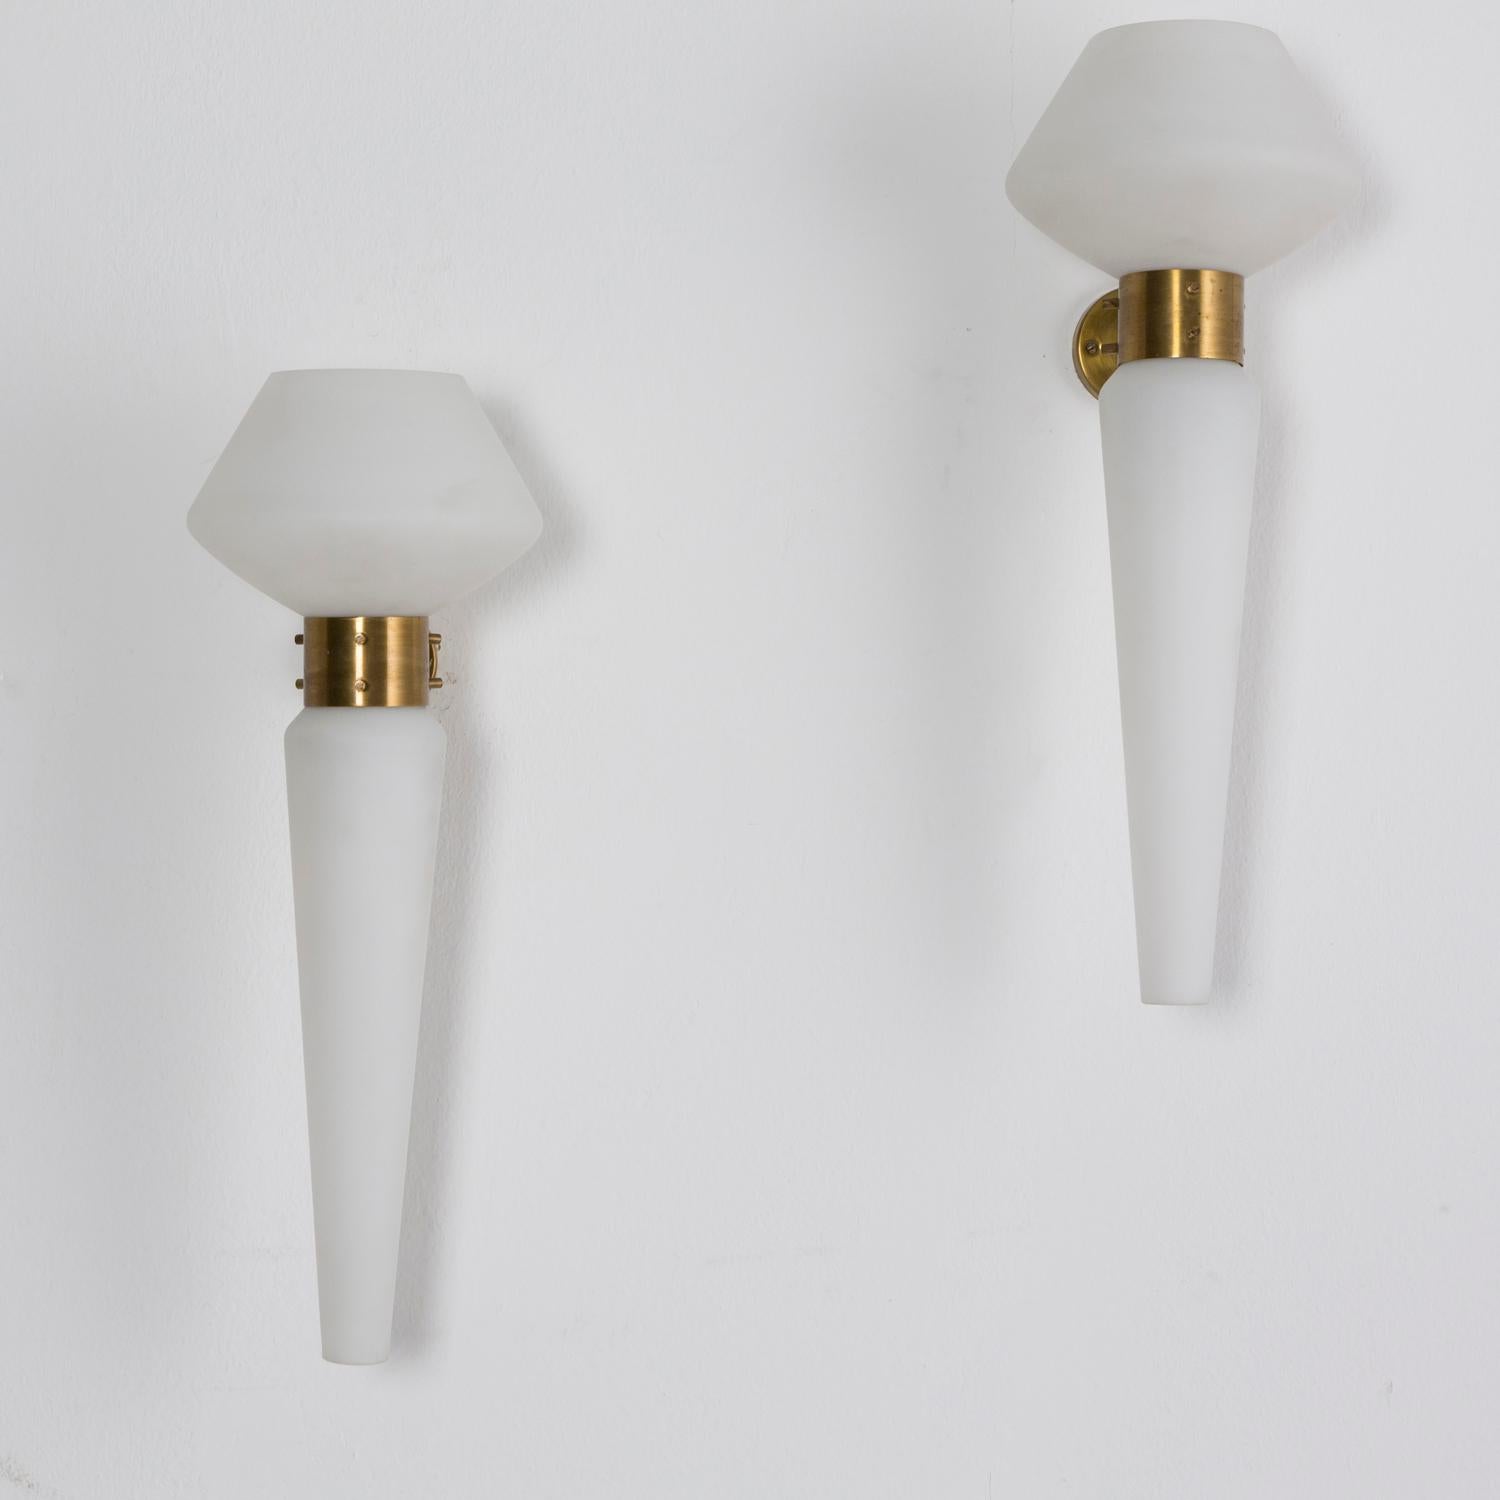 Pair of tall wall lamps manufactured in Italy in the 1950s in the manner of Stilnovo, made from two white opaline glass diffusers that can be inverted. Brass support.